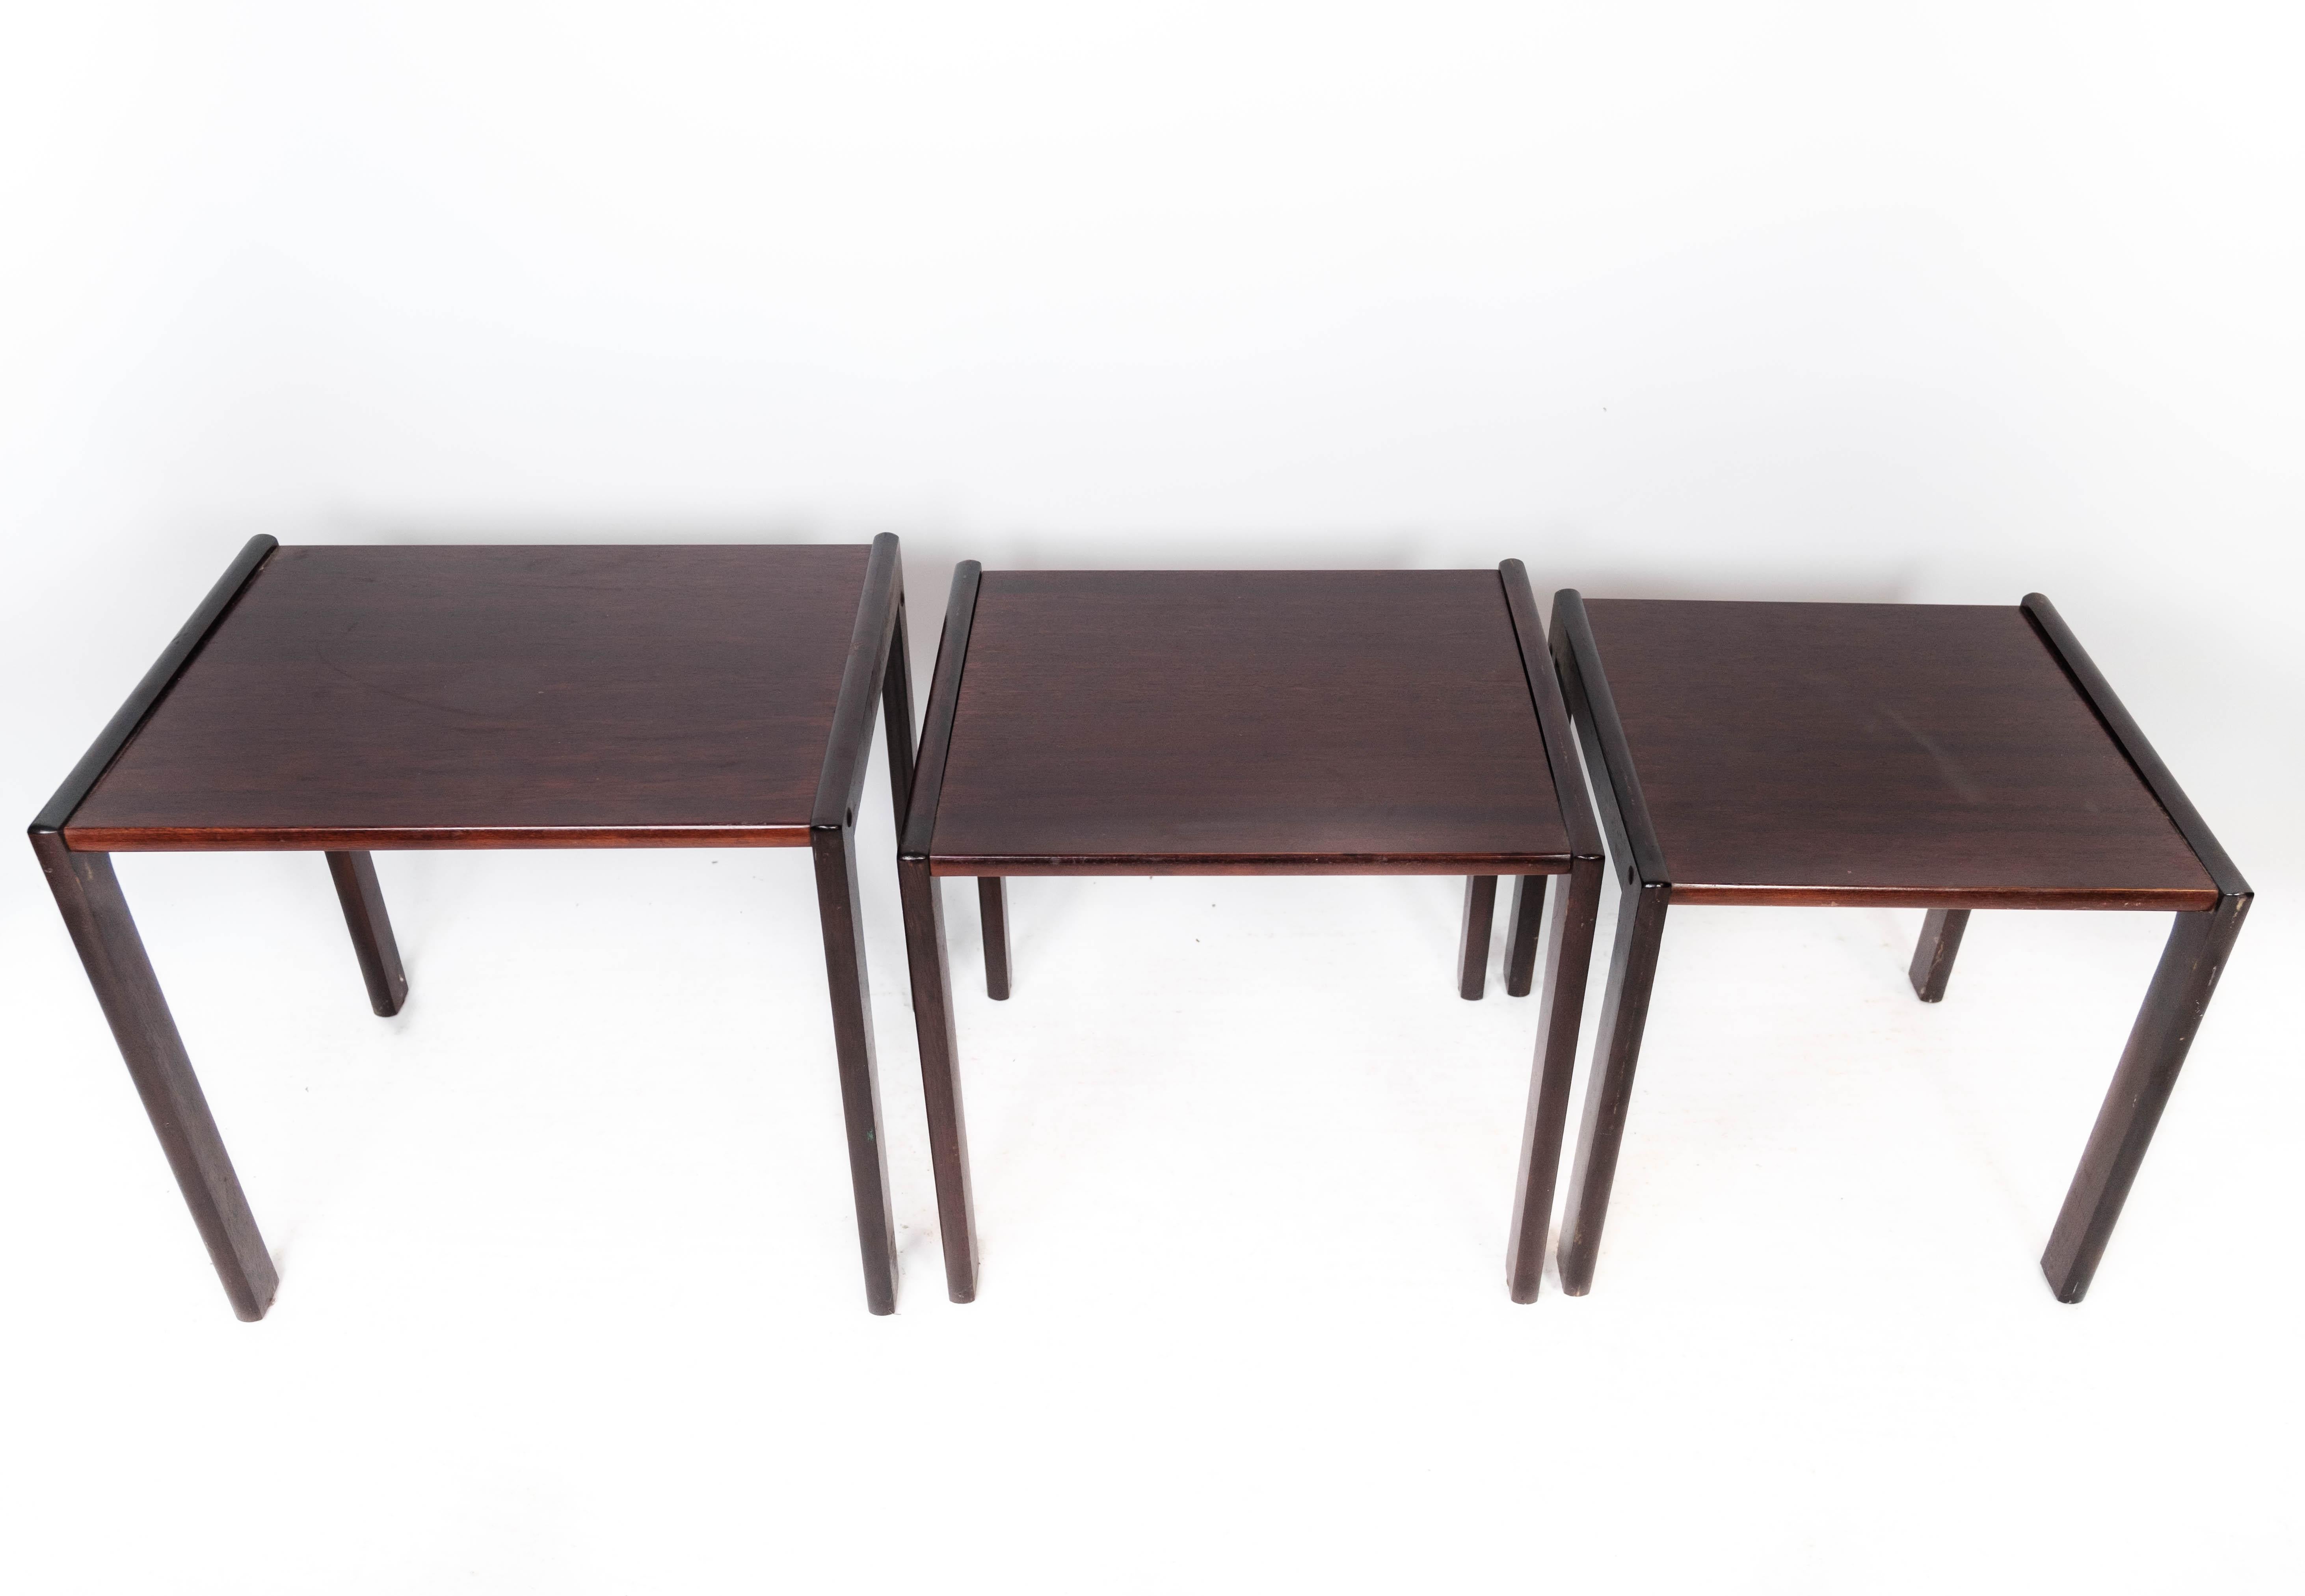 Set of Nesting Tables in Dark Wood of Danish Design from the 1960s For Sale 4